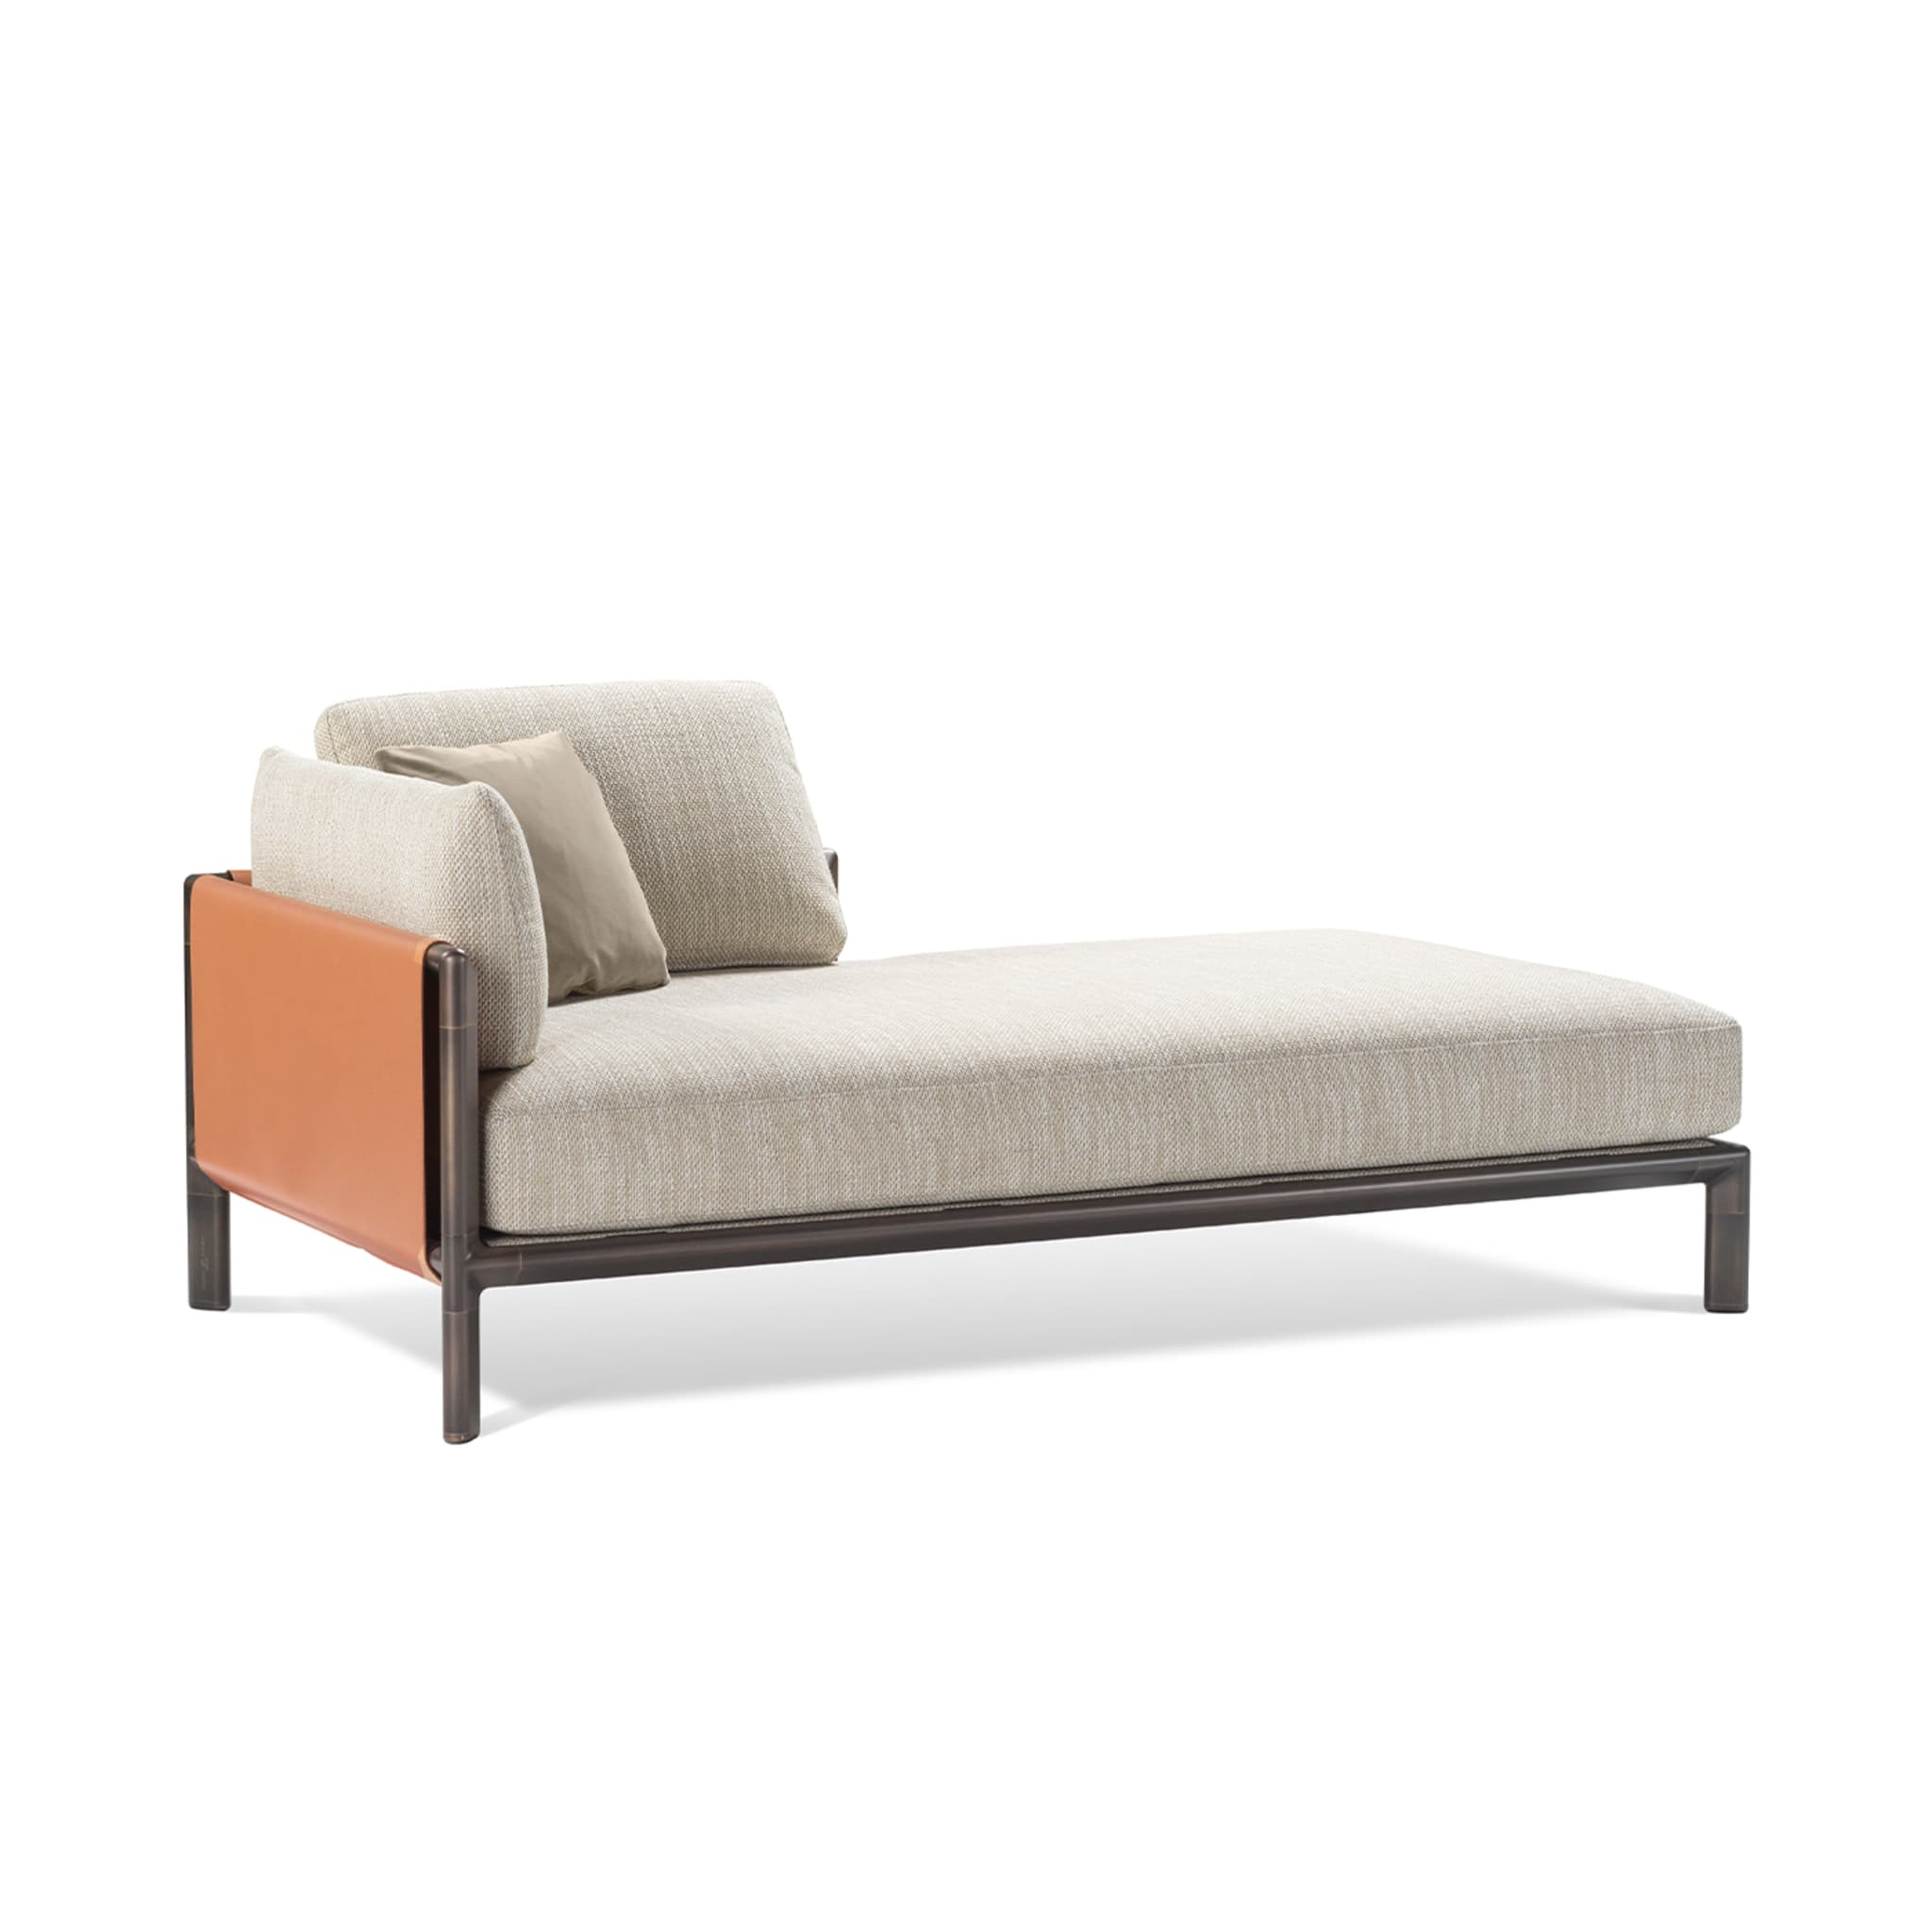 Frame L-Shaped Chaise Longue - Alternative view 1